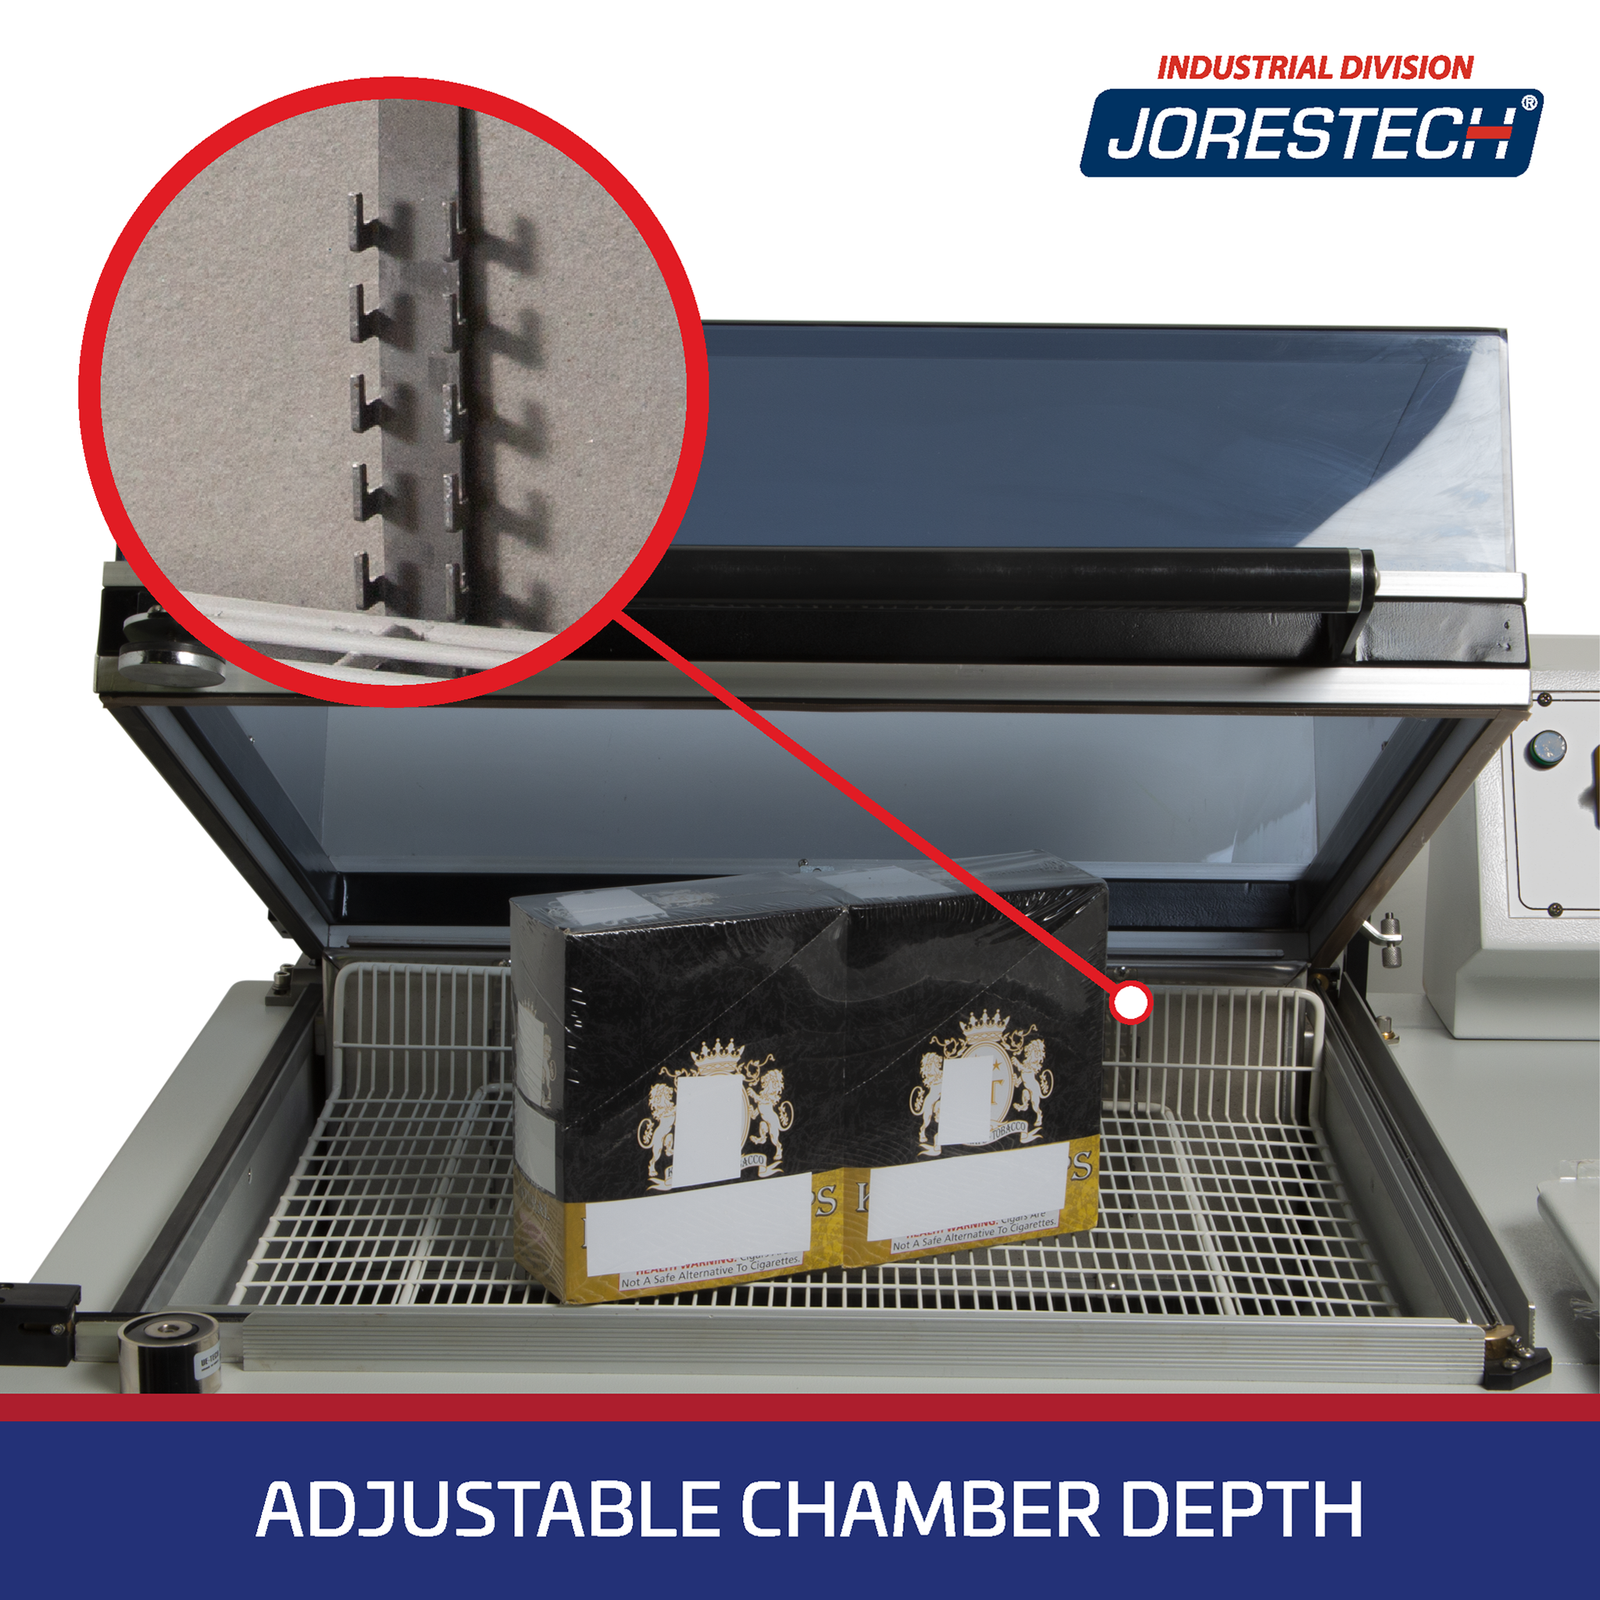 Close up of the shrink chamber or a JORES TECHNOLOGIES® shrink wrapping system with two boxes that were shrink packaged together into one bundle. A zoomed detail shows the height adjustment racks behind the chamber tray where chamber depth can be adjusted. Blue banner on the bottom says: Adjustable Chamber Depth.